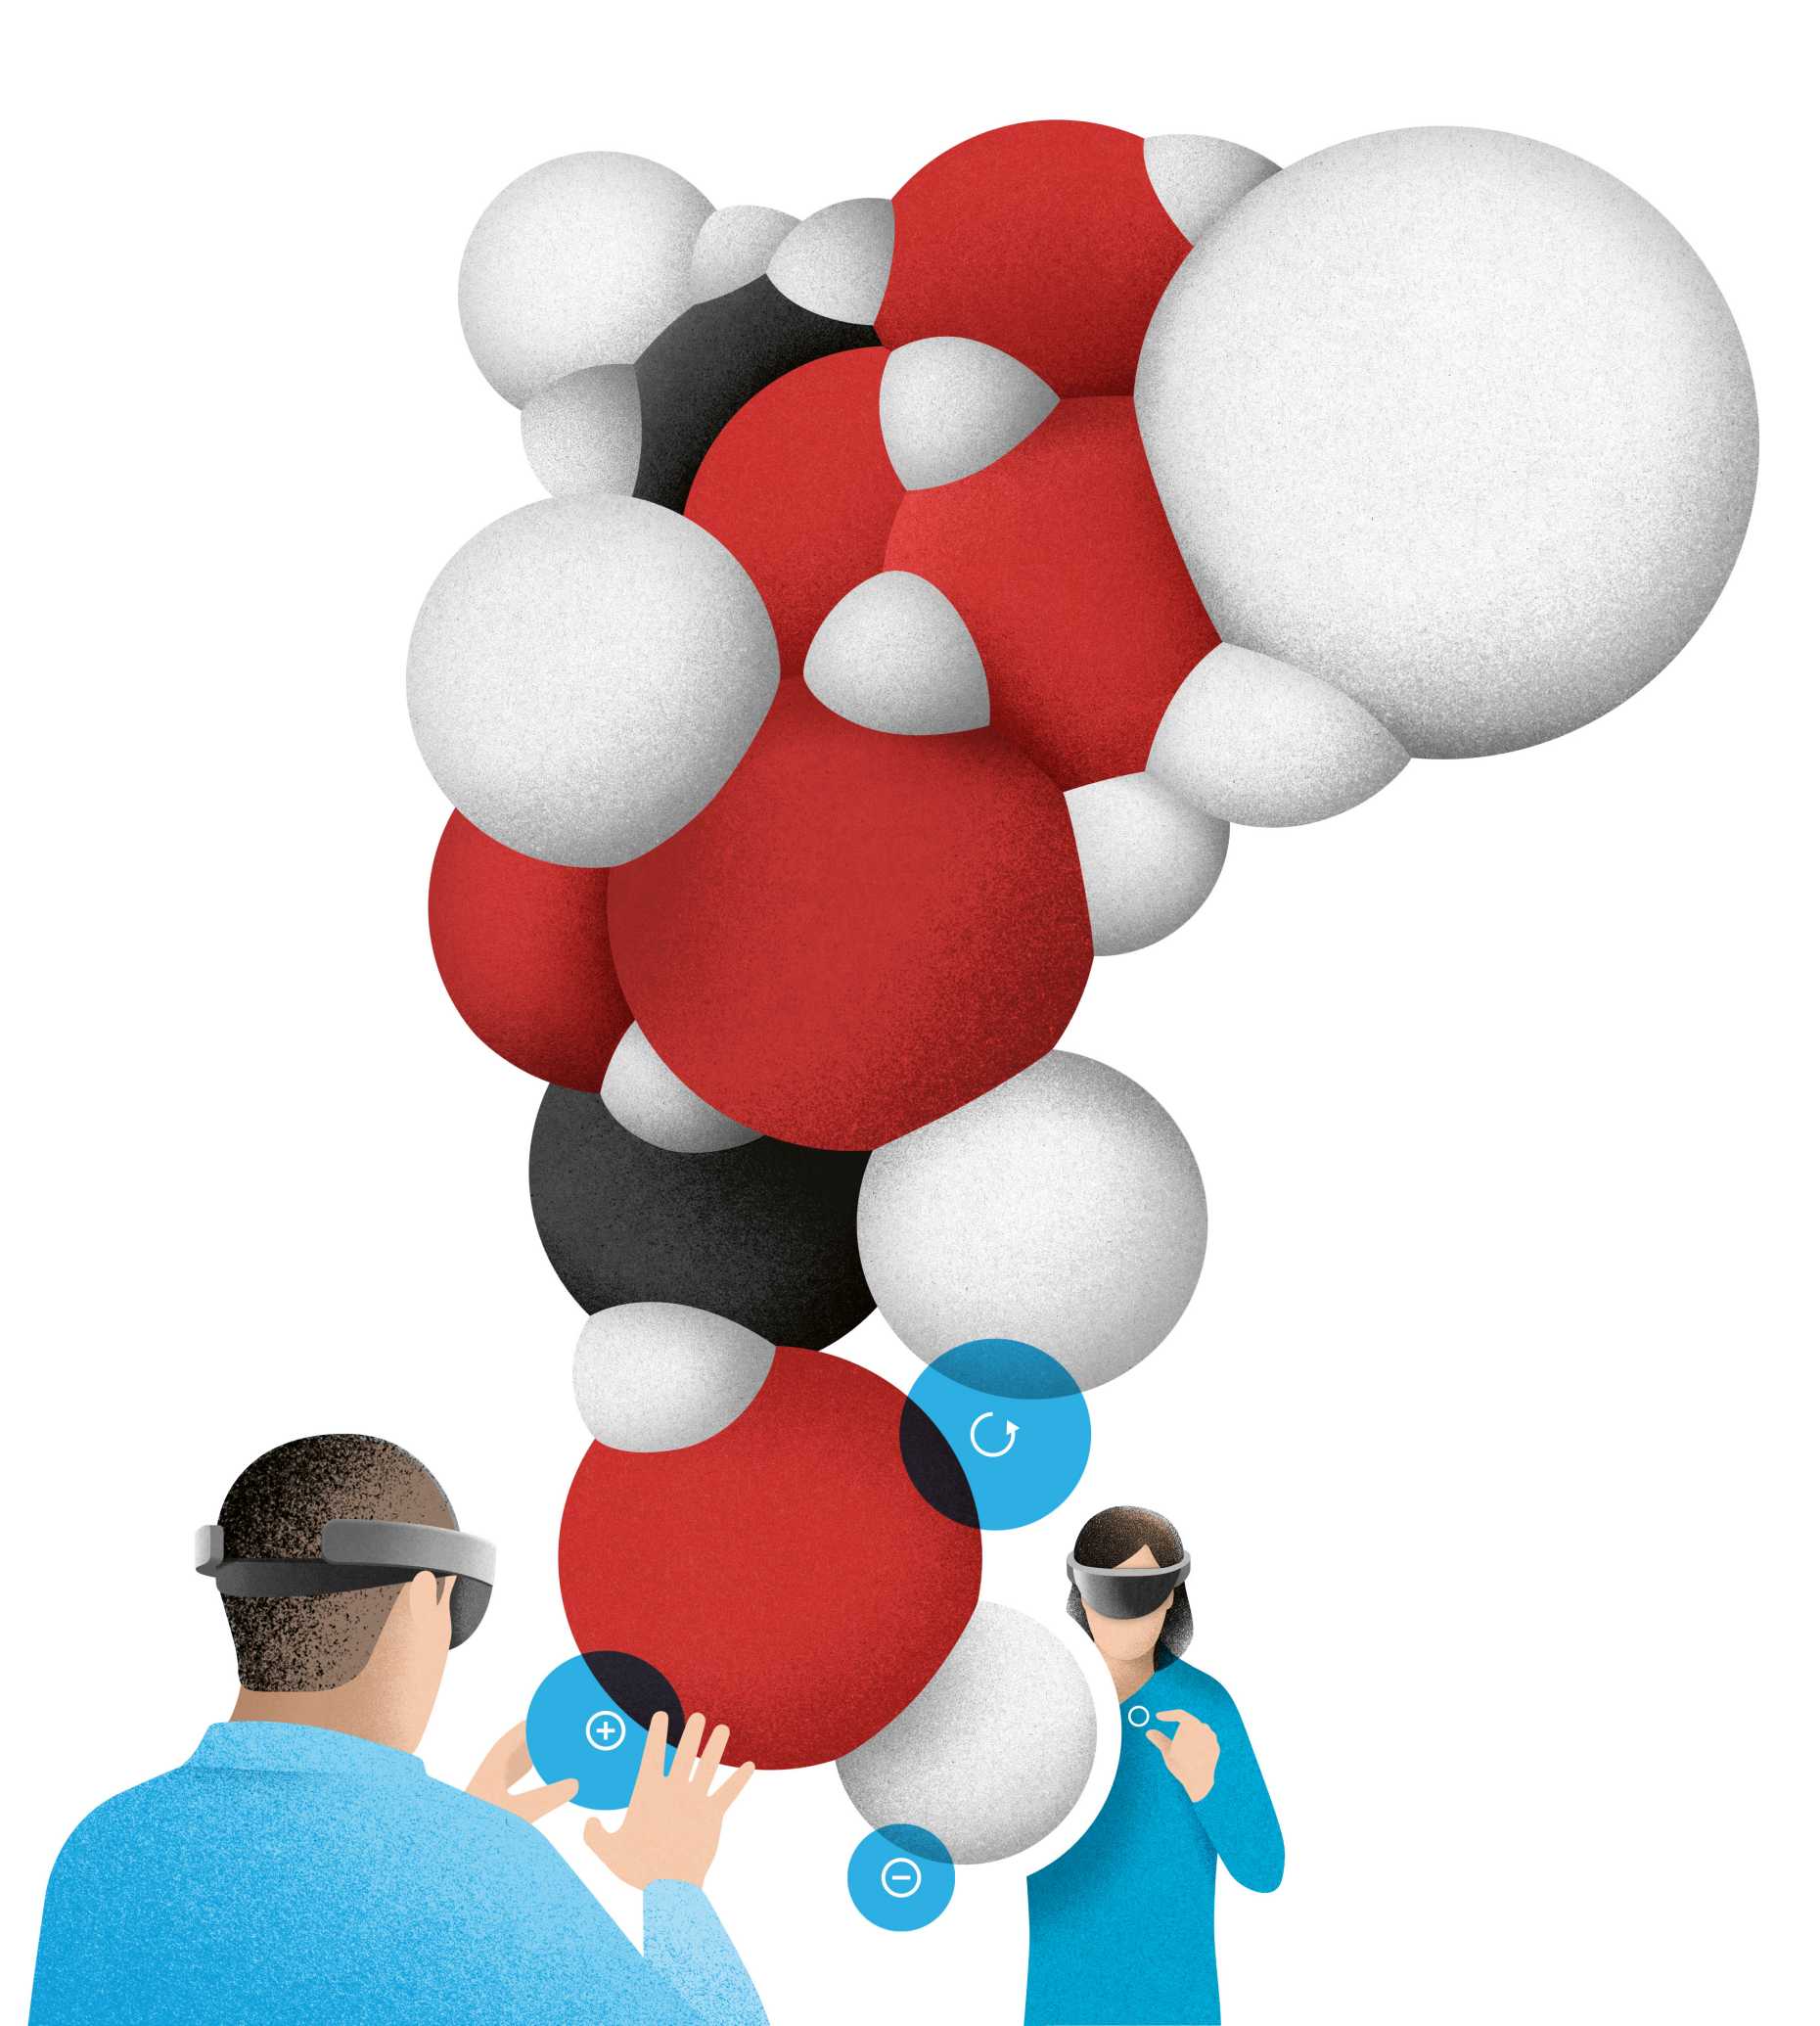 Enlarged view: By using HoloLens glasses, a protein can be experienced as a virtual object in space. (Illustration: Aurel Märki)